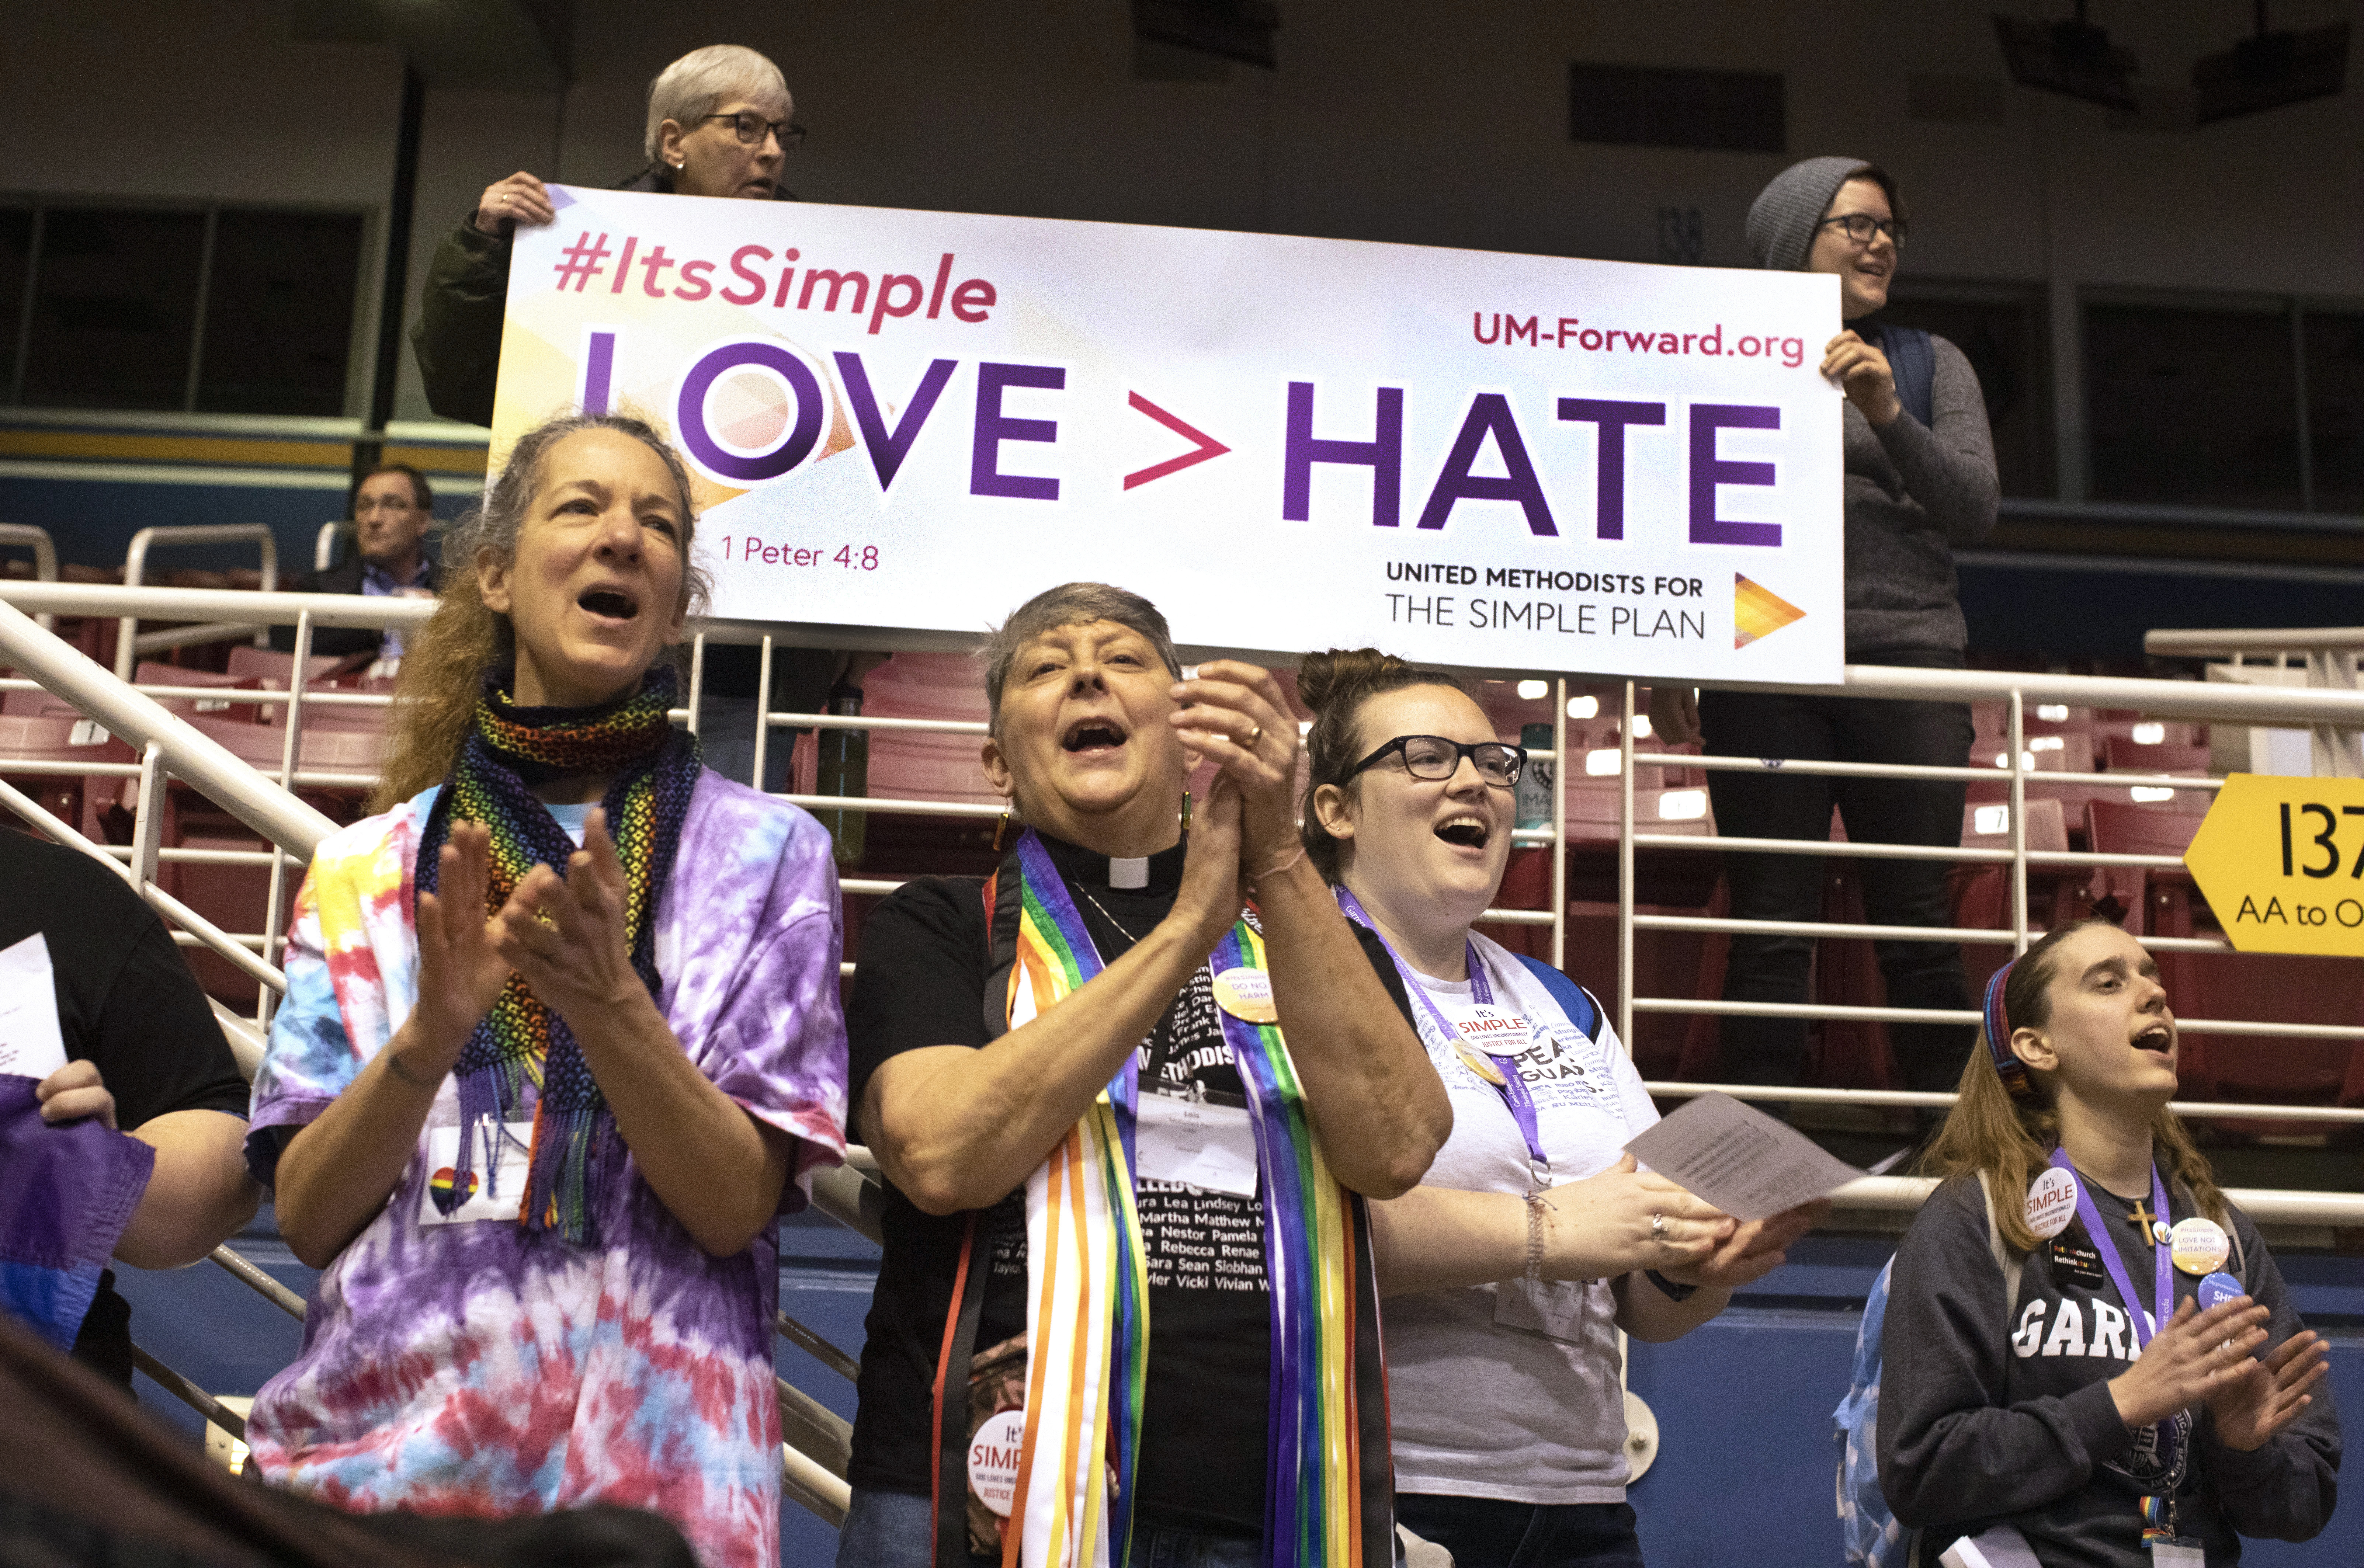 Supporters for the Simple Plan hold banners and sing before the afternoon session at the 2019 Special Session of the United Methodist General Conference. The demonstration was held inside the Dome of America's Center in St. Louis on Feb. 24. Photo by Kathleen Barry, UMNS.